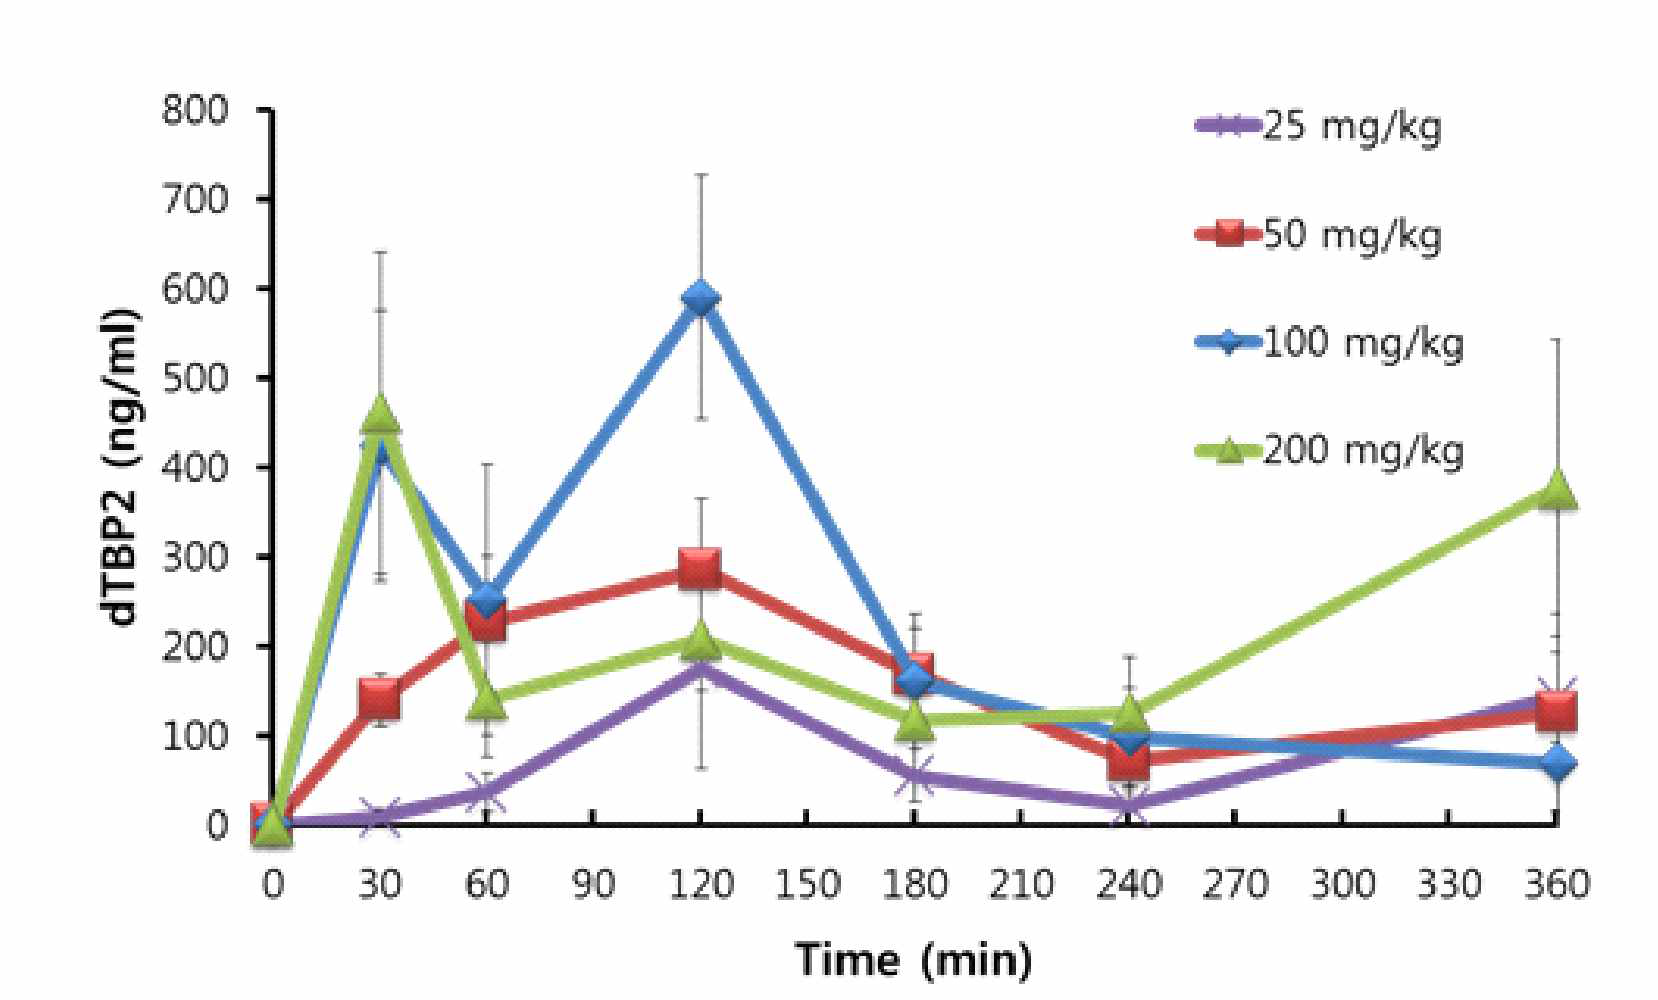 Plasma concentrations of dTBP2 after subcutaneous delivery of 25, 50, 100, and 200 mg/kg of pep仕de to male Wistar rat (n = 4). Each value represents mean ± SEM